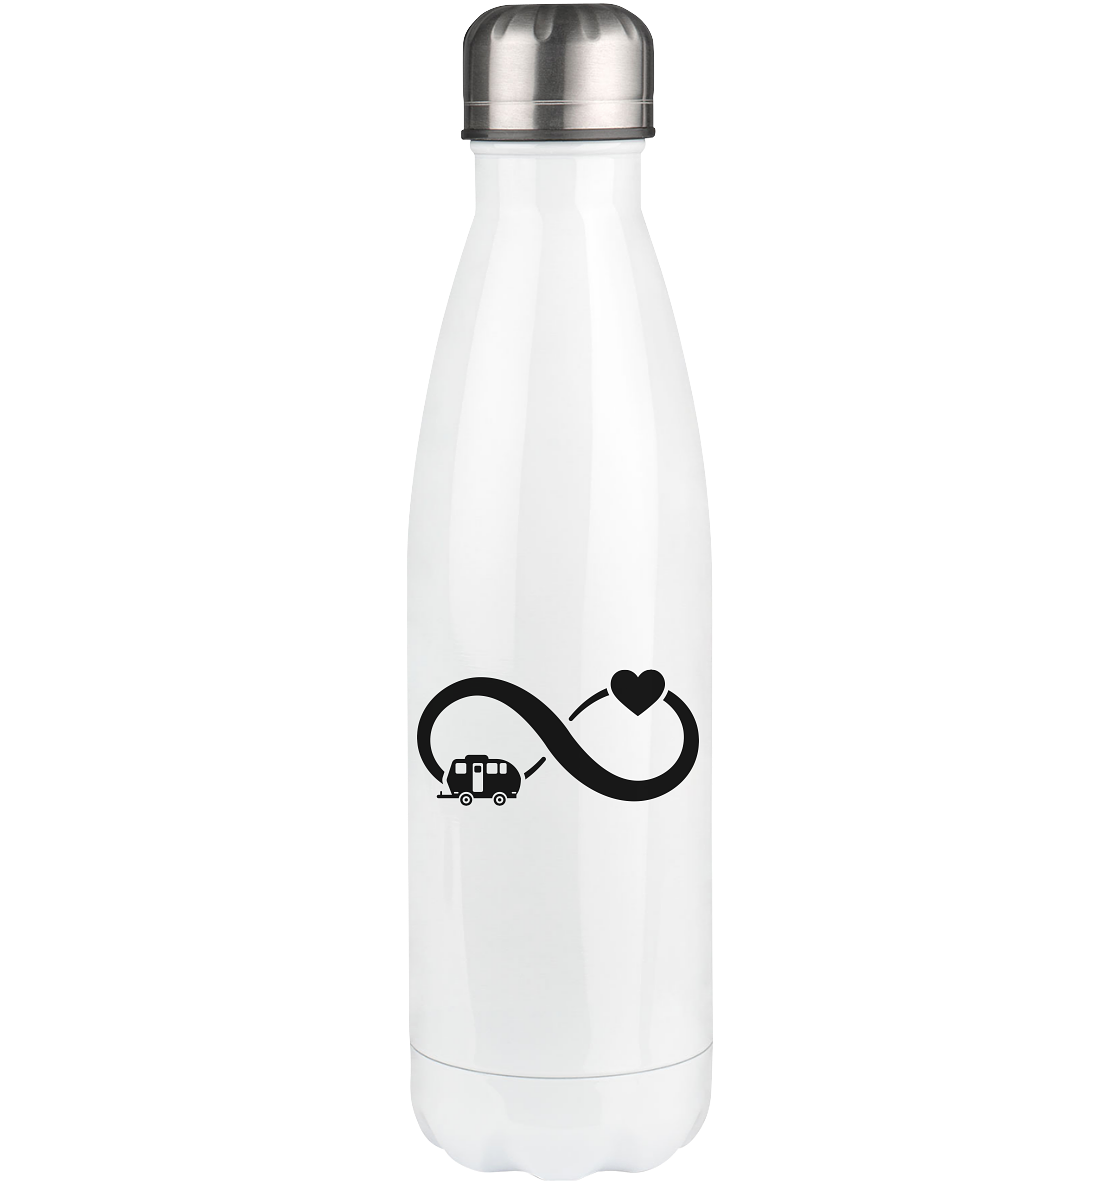 Infinity Heart and Camping 2 - Edelstahl Thermosflasche camping UONP 500ml